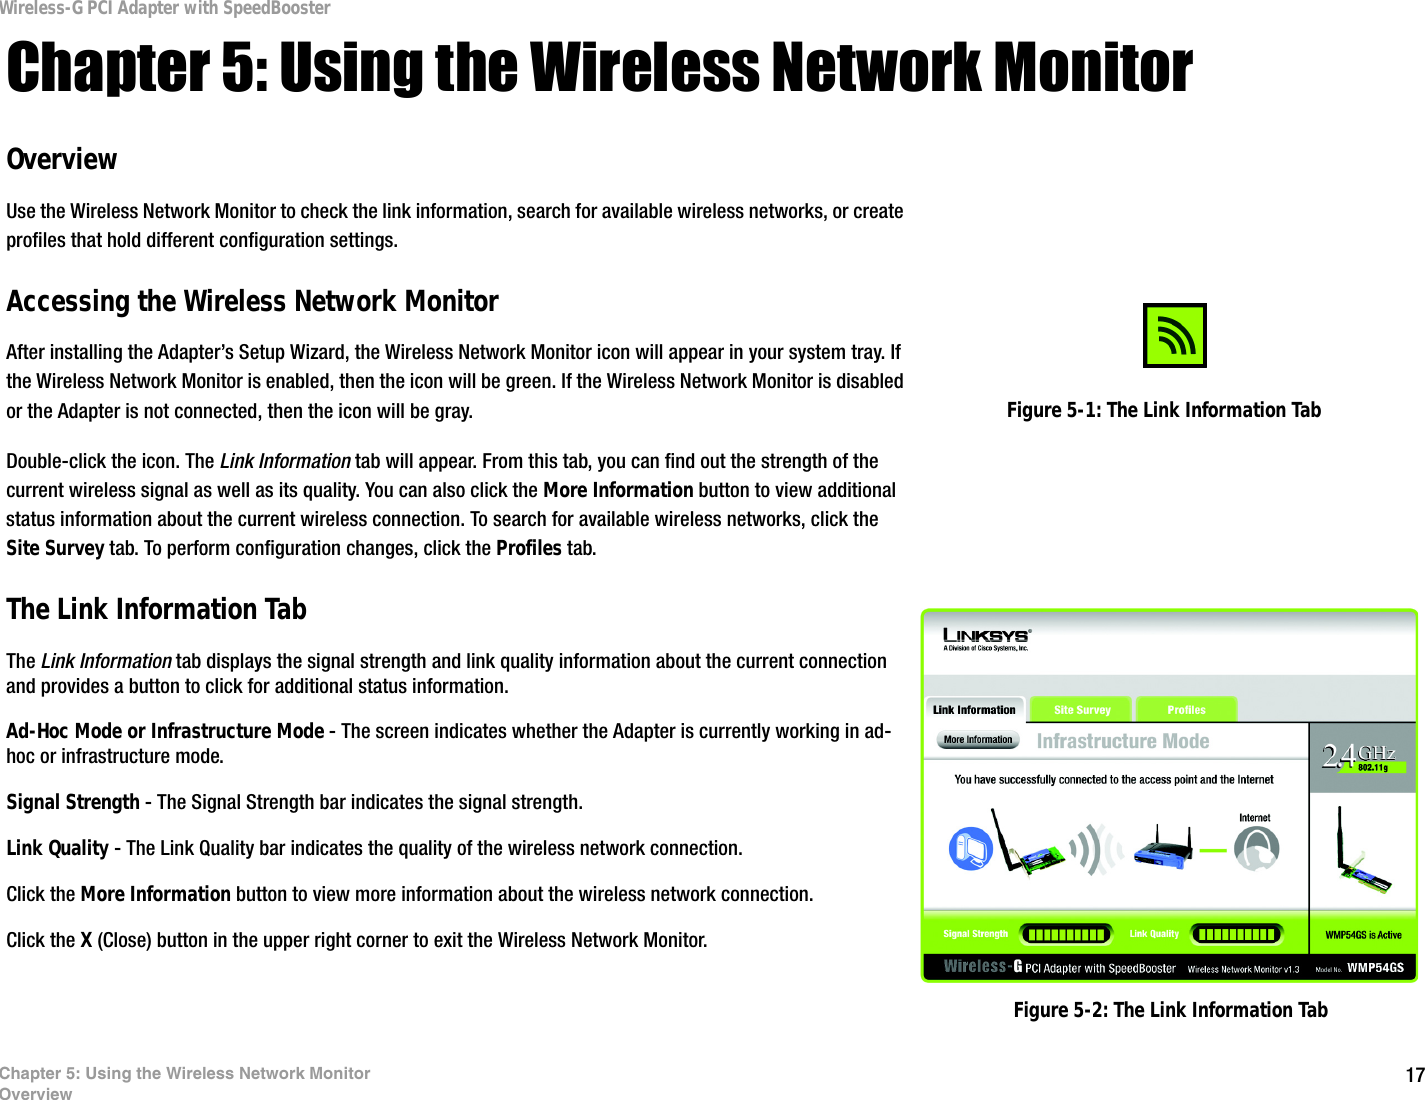 17Chapter 5: Using the Wireless Network MonitorOverviewWireless-G PCI Adapter with SpeedBoosterChapter 5: Using the Wireless Network MonitorOverviewUse the Wireless Network Monitor to check the link information, search for available wireless networks, or create profiles that hold different configuration settings.Accessing the Wireless Network MonitorAfter installing the Adapter’s Setup Wizard, the Wireless Network Monitor icon will appear in your system tray. If the Wireless Network Monitor is enabled, then the icon will be green. If the Wireless Network Monitor is disabled or the Adapter is not connected, then the icon will be gray.Double-click the icon. The Link Information tab will appear. From this tab, you can find out the strength of the current wireless signal as well as its quality. You can also click the More Information button to view additional status information about the current wireless connection. To search for available wireless networks, click the Site Survey tab. To perform configuration changes, click the Profiles tab.The Link Information TabThe Link Information tab displays the signal strength and link quality information about the current connection and provides a button to click for additional status information.  Ad-Hoc Mode or Infrastructure Mode - The screen indicates whether the Adapter is currently working in ad-hoc or infrastructure mode. Signal Strength - The Signal Strength bar indicates the signal strength. Link Quality - The Link Quality bar indicates the quality of the wireless network connection.Click the More Information button to view more information about the wireless network connection.Click the X (Close) button in the upper right corner to exit the Wireless Network Monitor. Figure 5-2: The Link Information TabFigure 5-1: The Link Information Tab